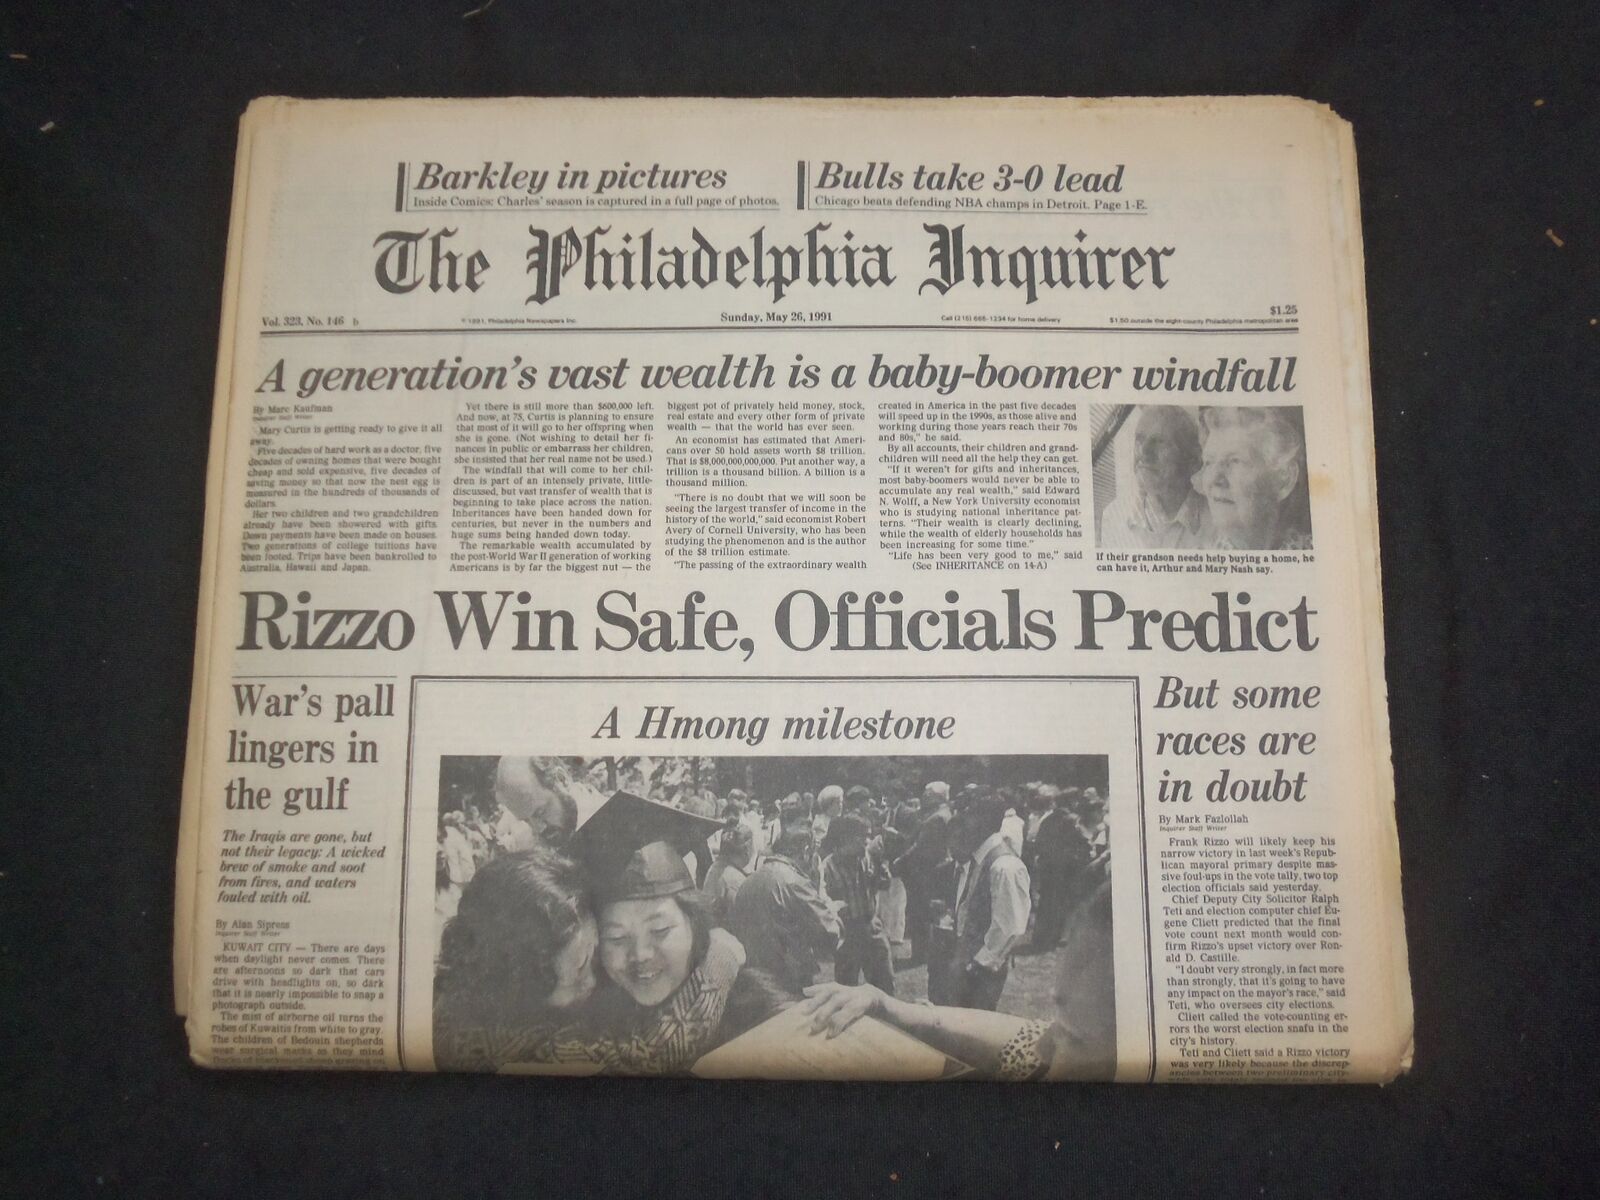 1991 MAY 26 PHILADELPHIA INQUIRER - RIZZO WIN SAFE, OFFICIALS PREDICT - NP 7451